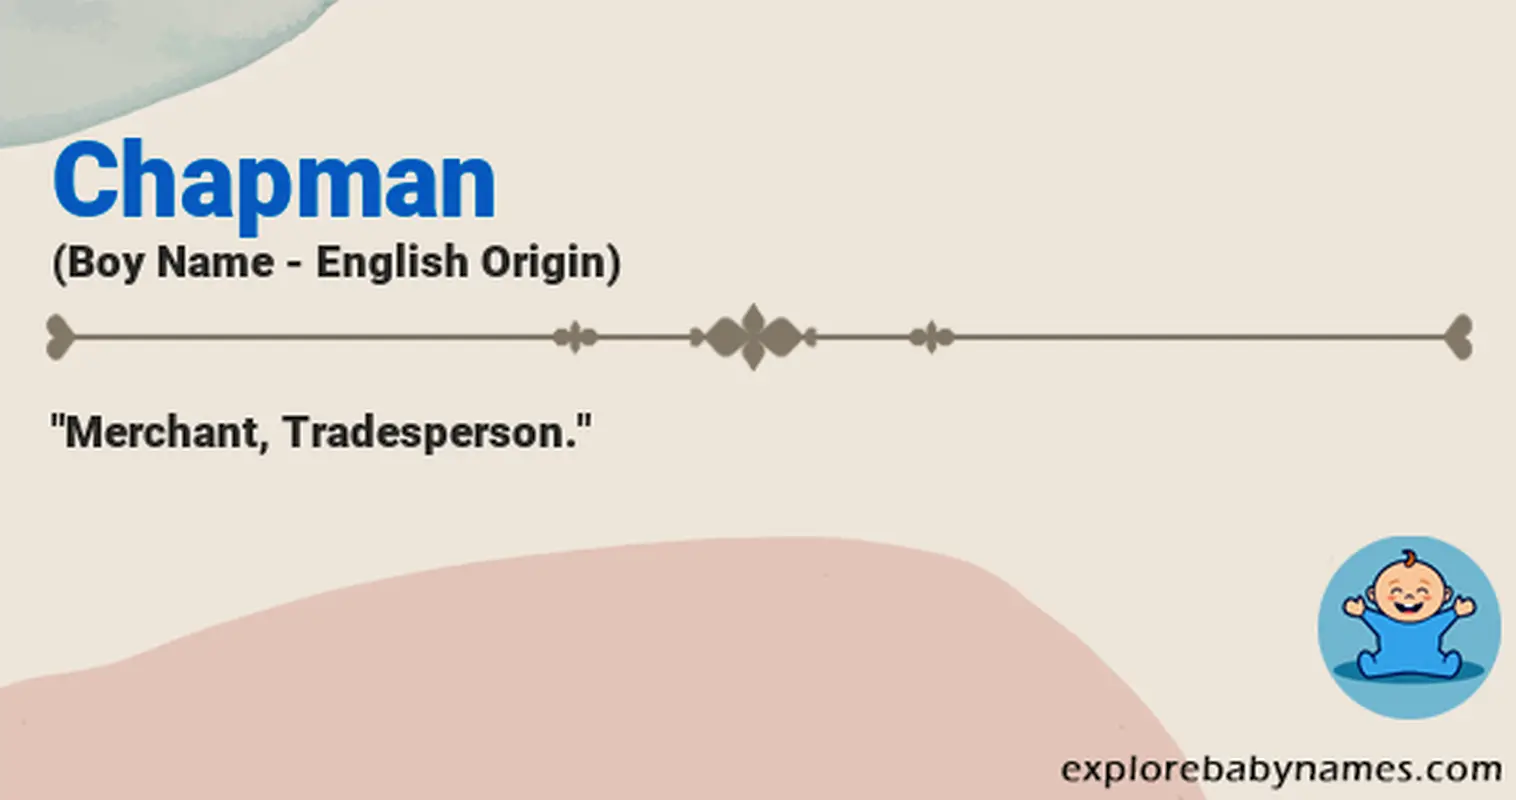 Meaning of Chapman